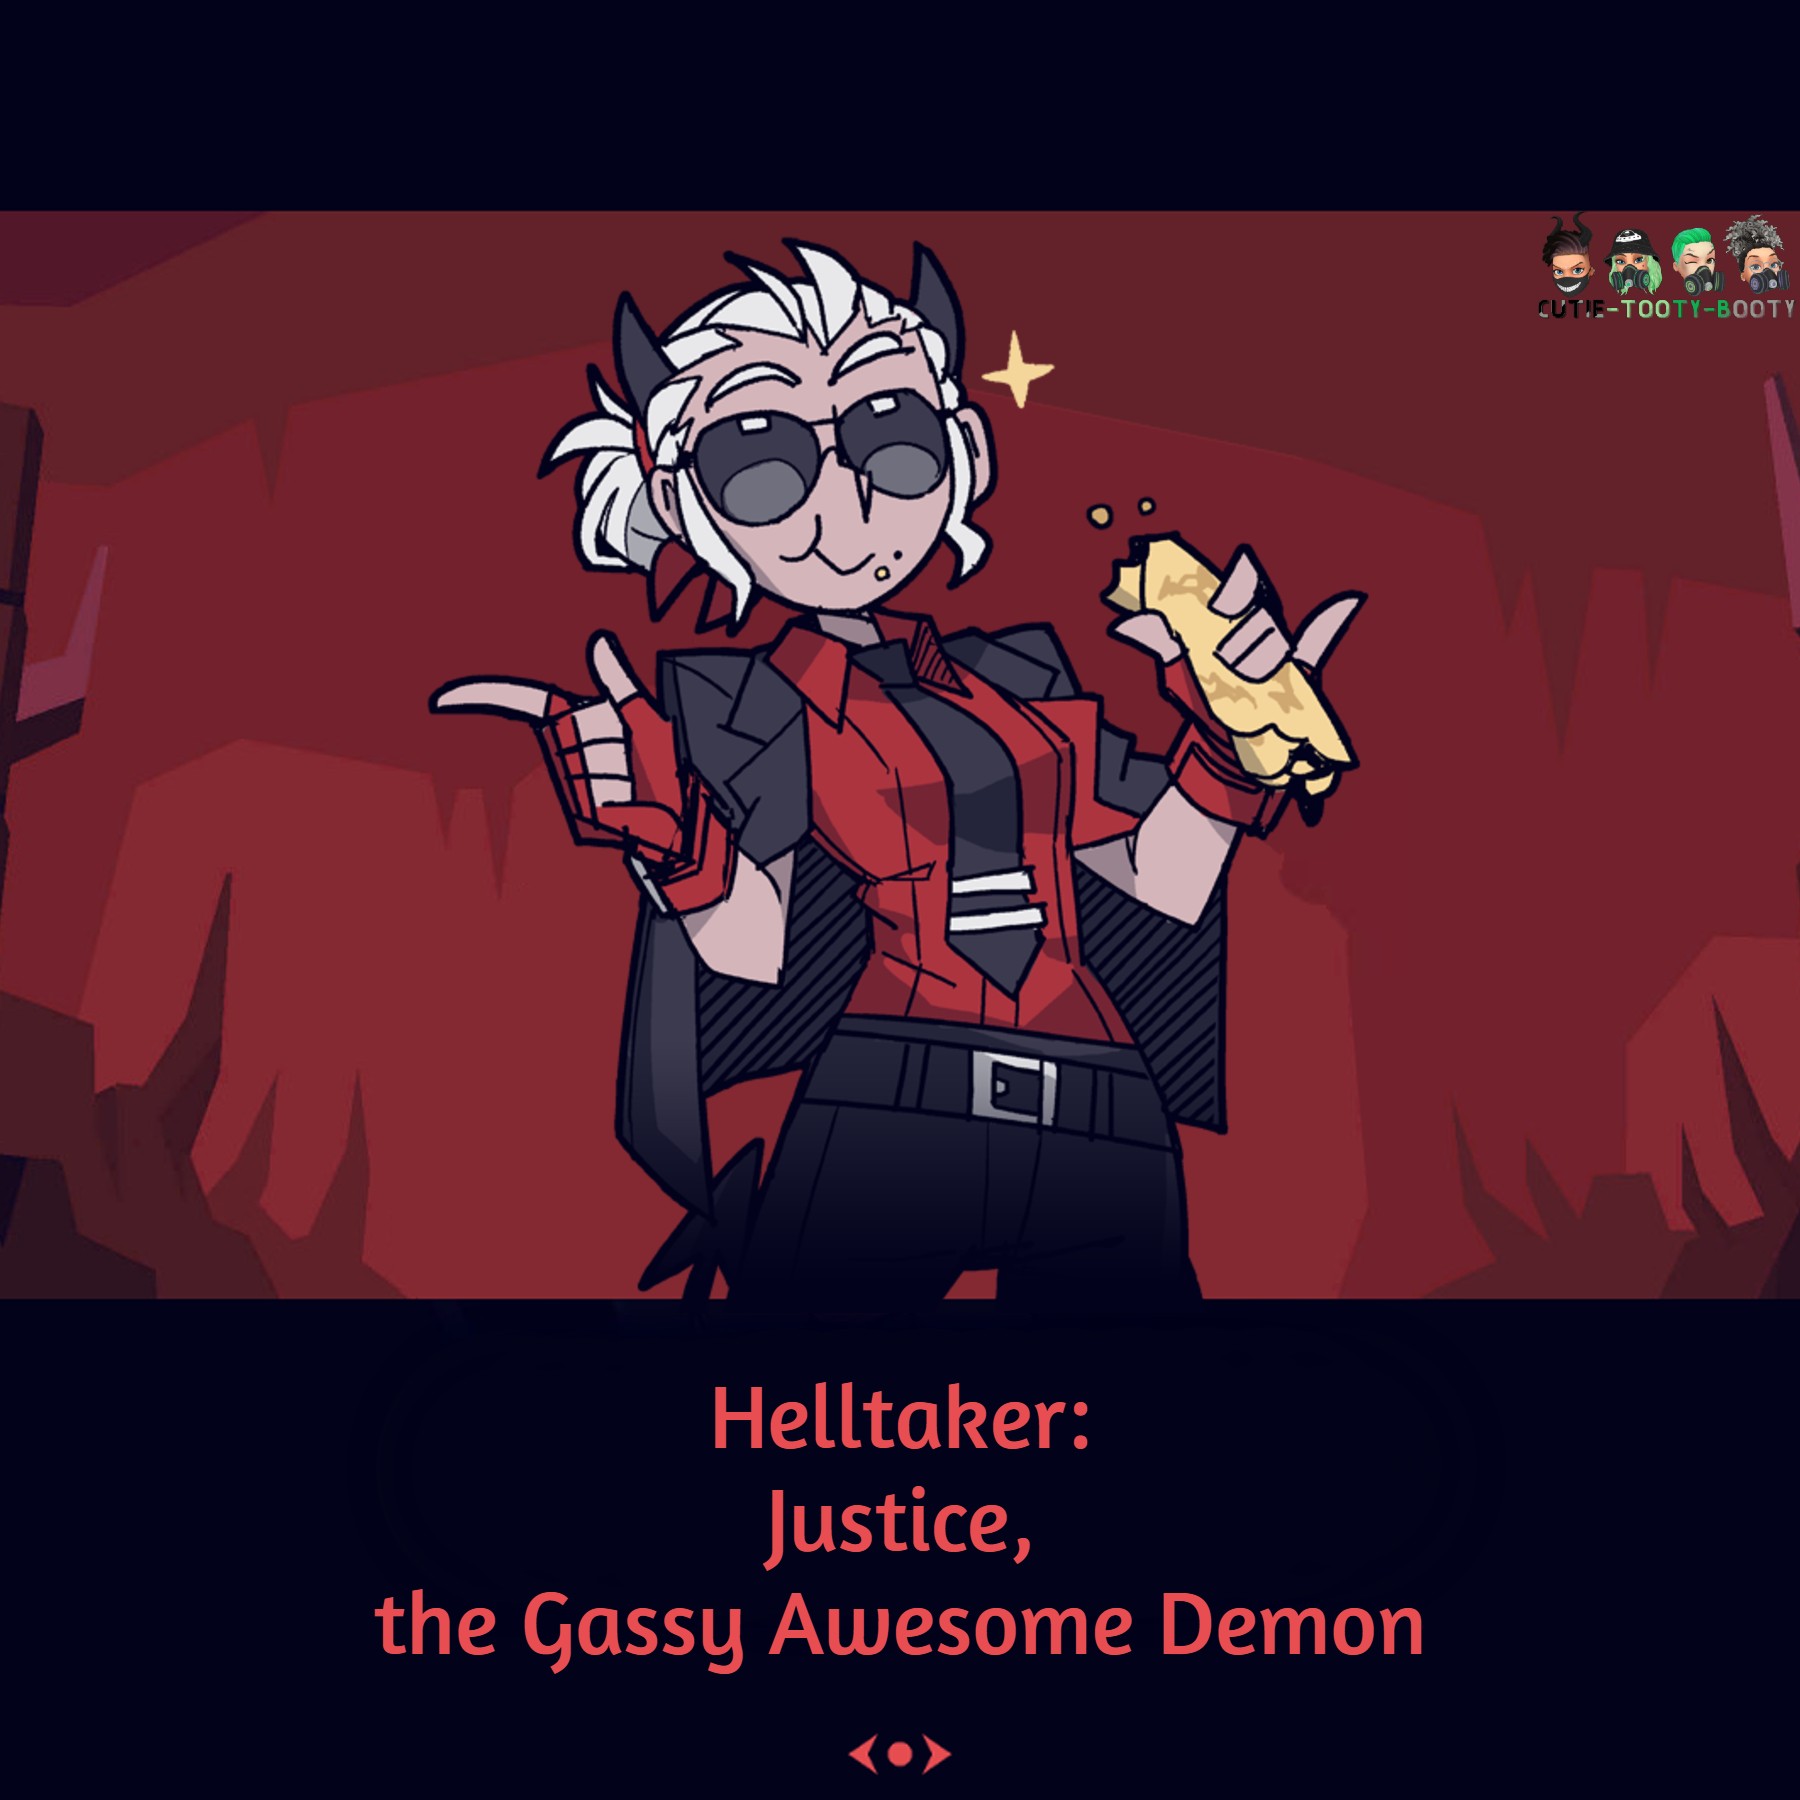 Helltaker: Justice, the Gassy Awesome Demon